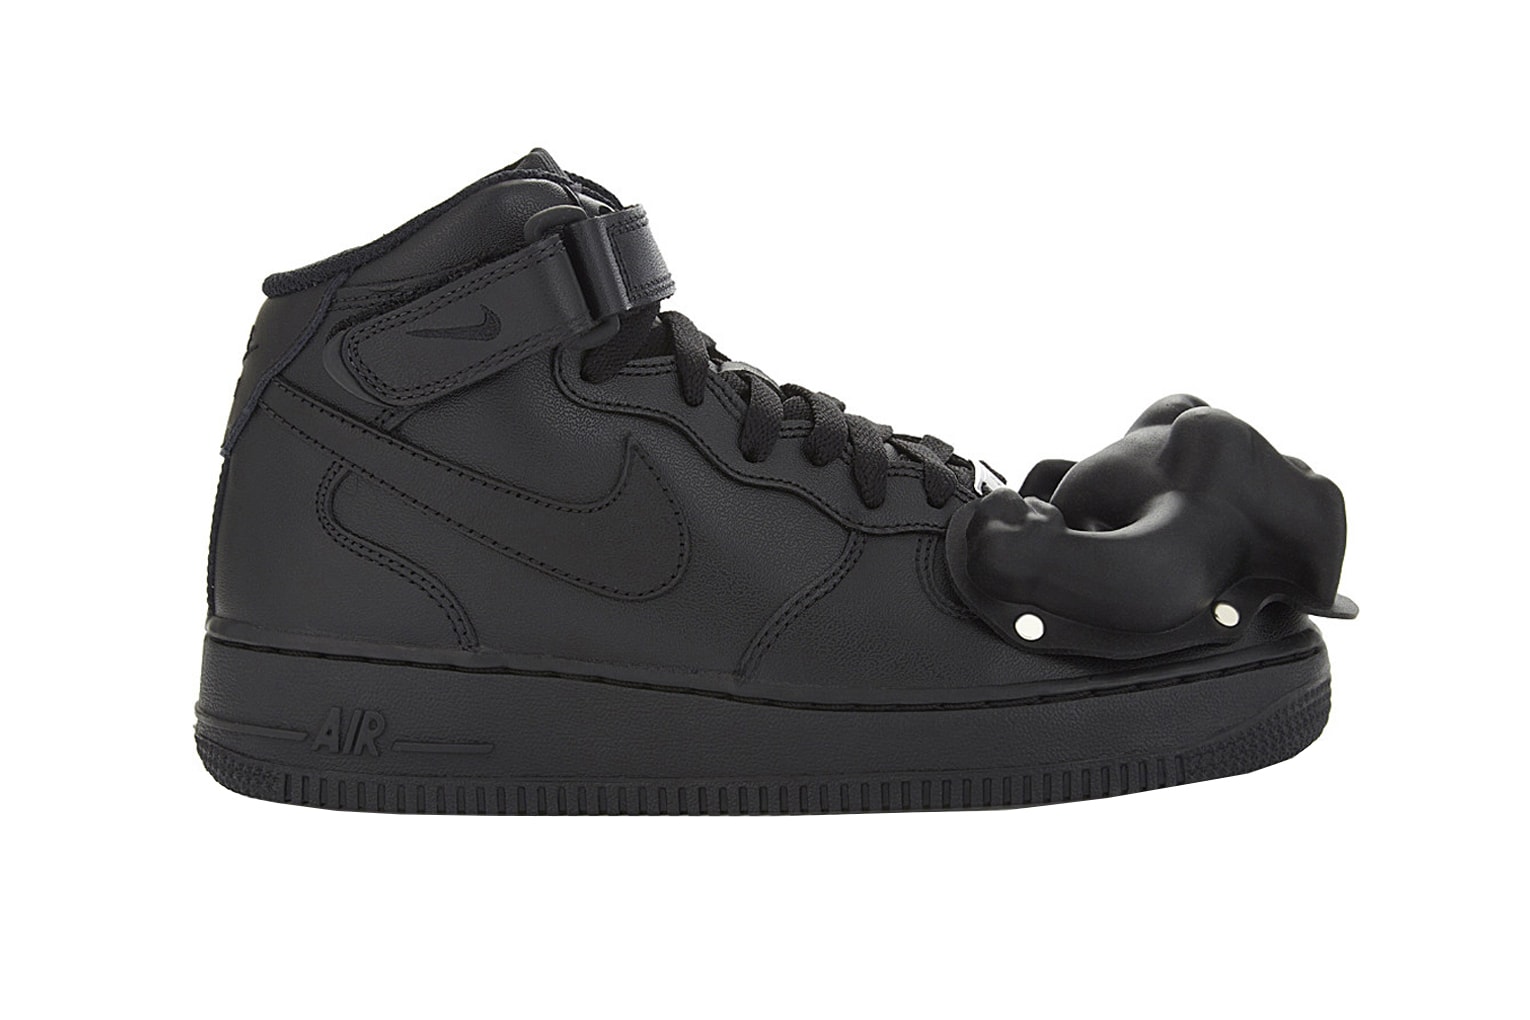 COMME des GARCONS x Nike Air Force 1 Available Now Closer Look